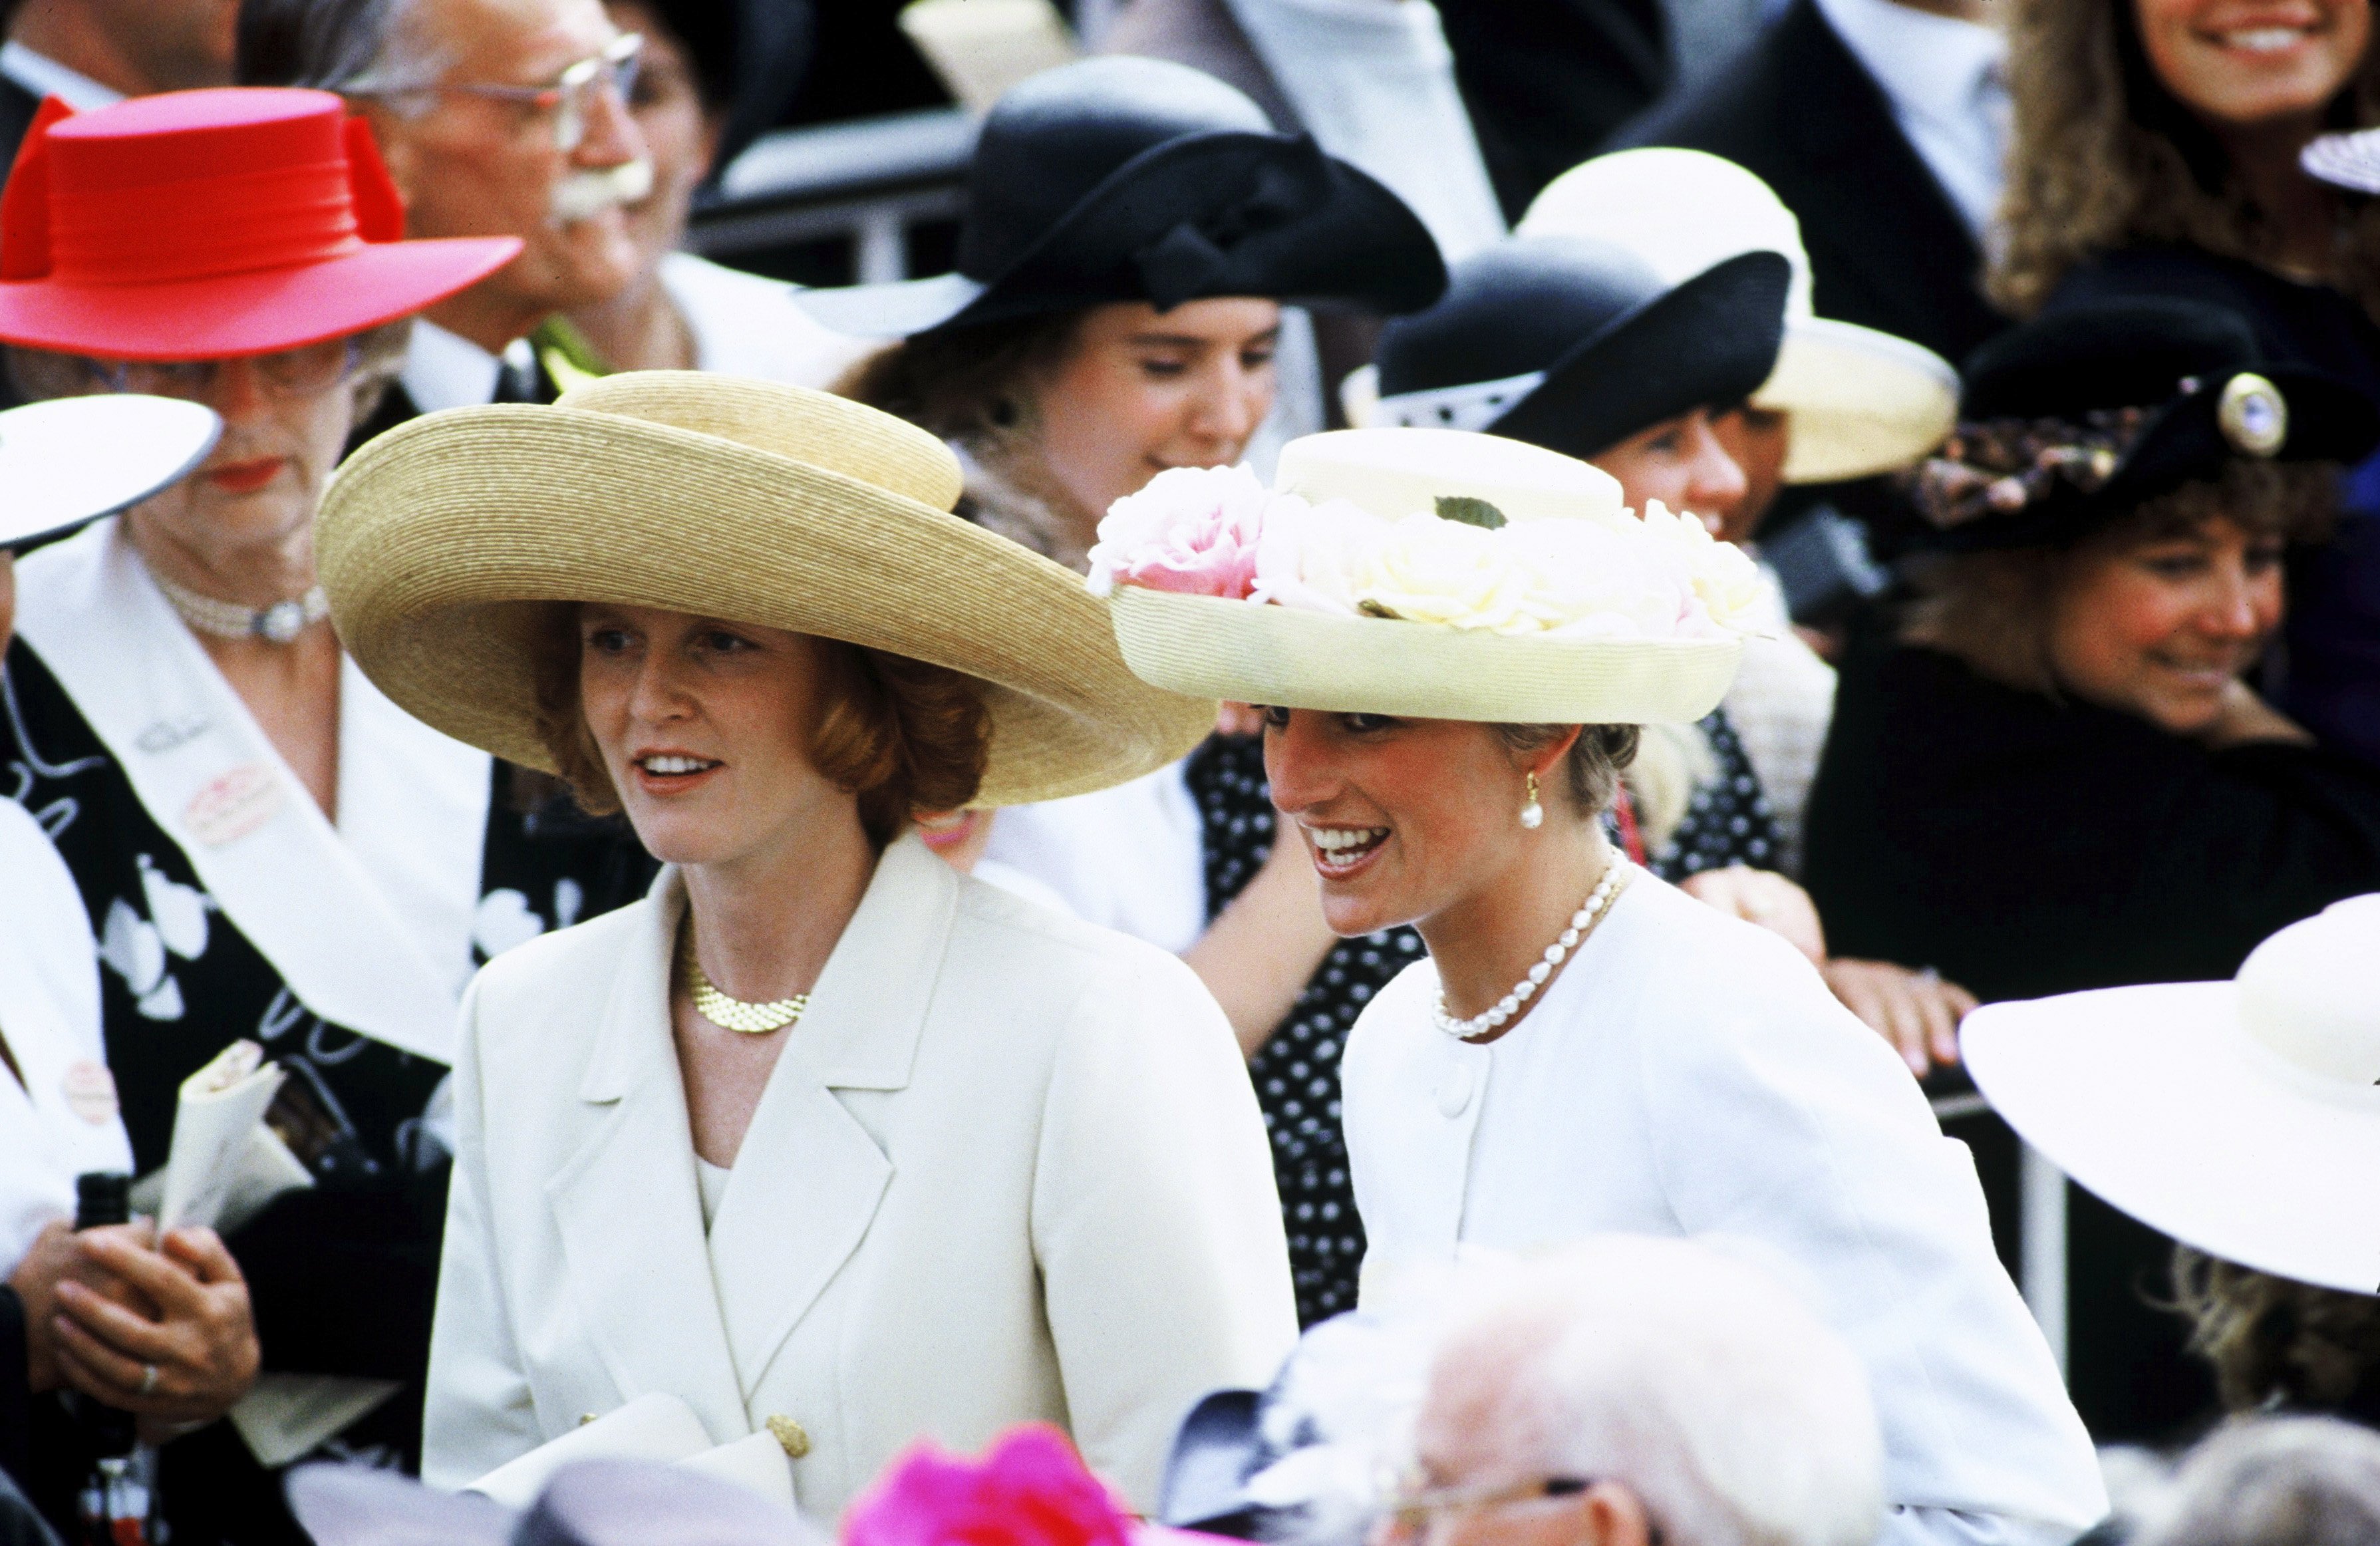 Princess Diana and Sarah Ferguson at the Royal Ascot races in Ascot, England in 1991. / Source: Getty Images